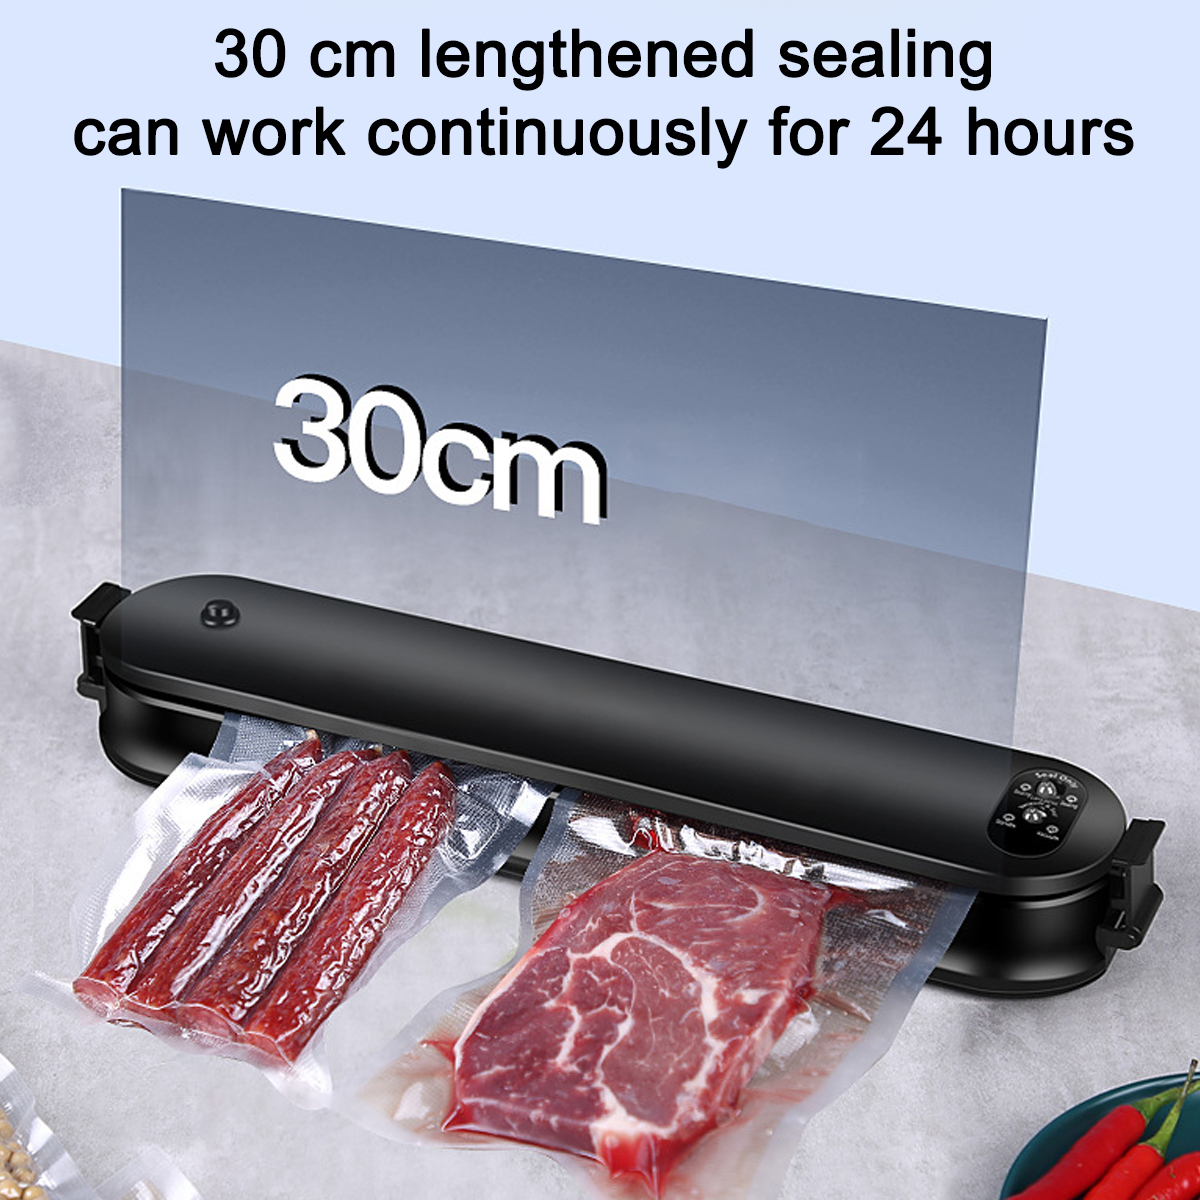 Electric-Food-Vacuum-Sealer-Powerful-Motor-Quick-Sealing-3-Fresh-keeping-Modes-for-Food-Preservation-1905323-8